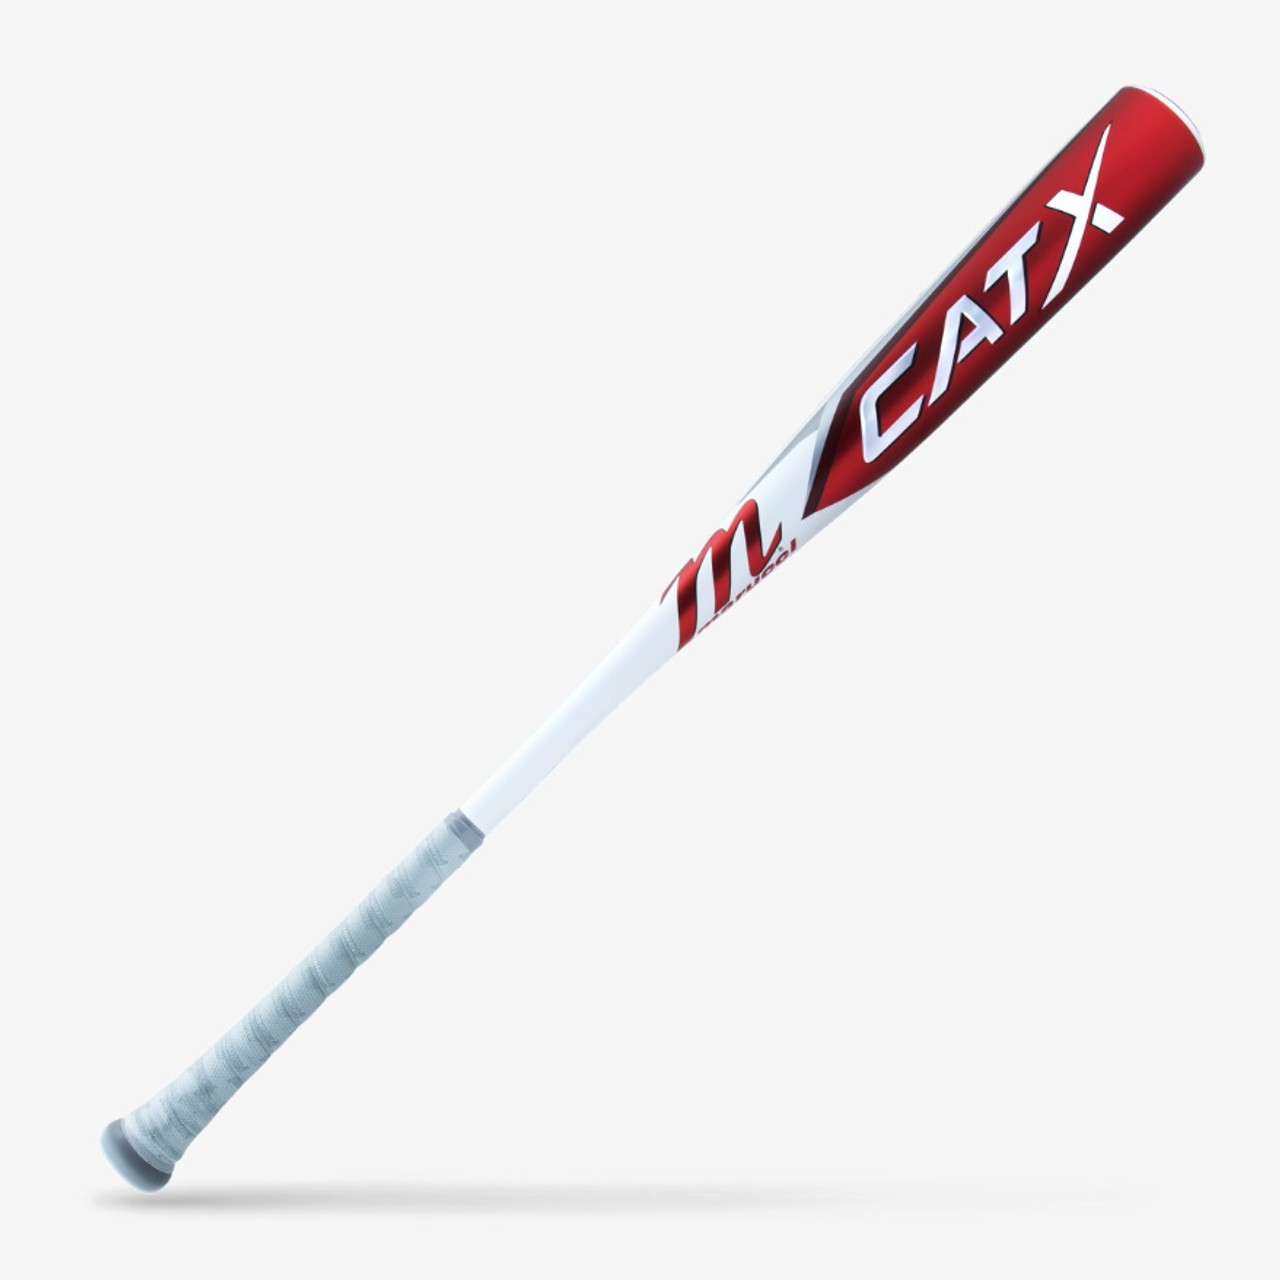 marucci-cat-x-bbcor-3-baseball-bat-30-inch-27-oz  MCBCX-3027   <h1 class=productView-title-lower>THE CATX BBCOR</h1> <p dir=ltr><span>The bat has a finely tuned